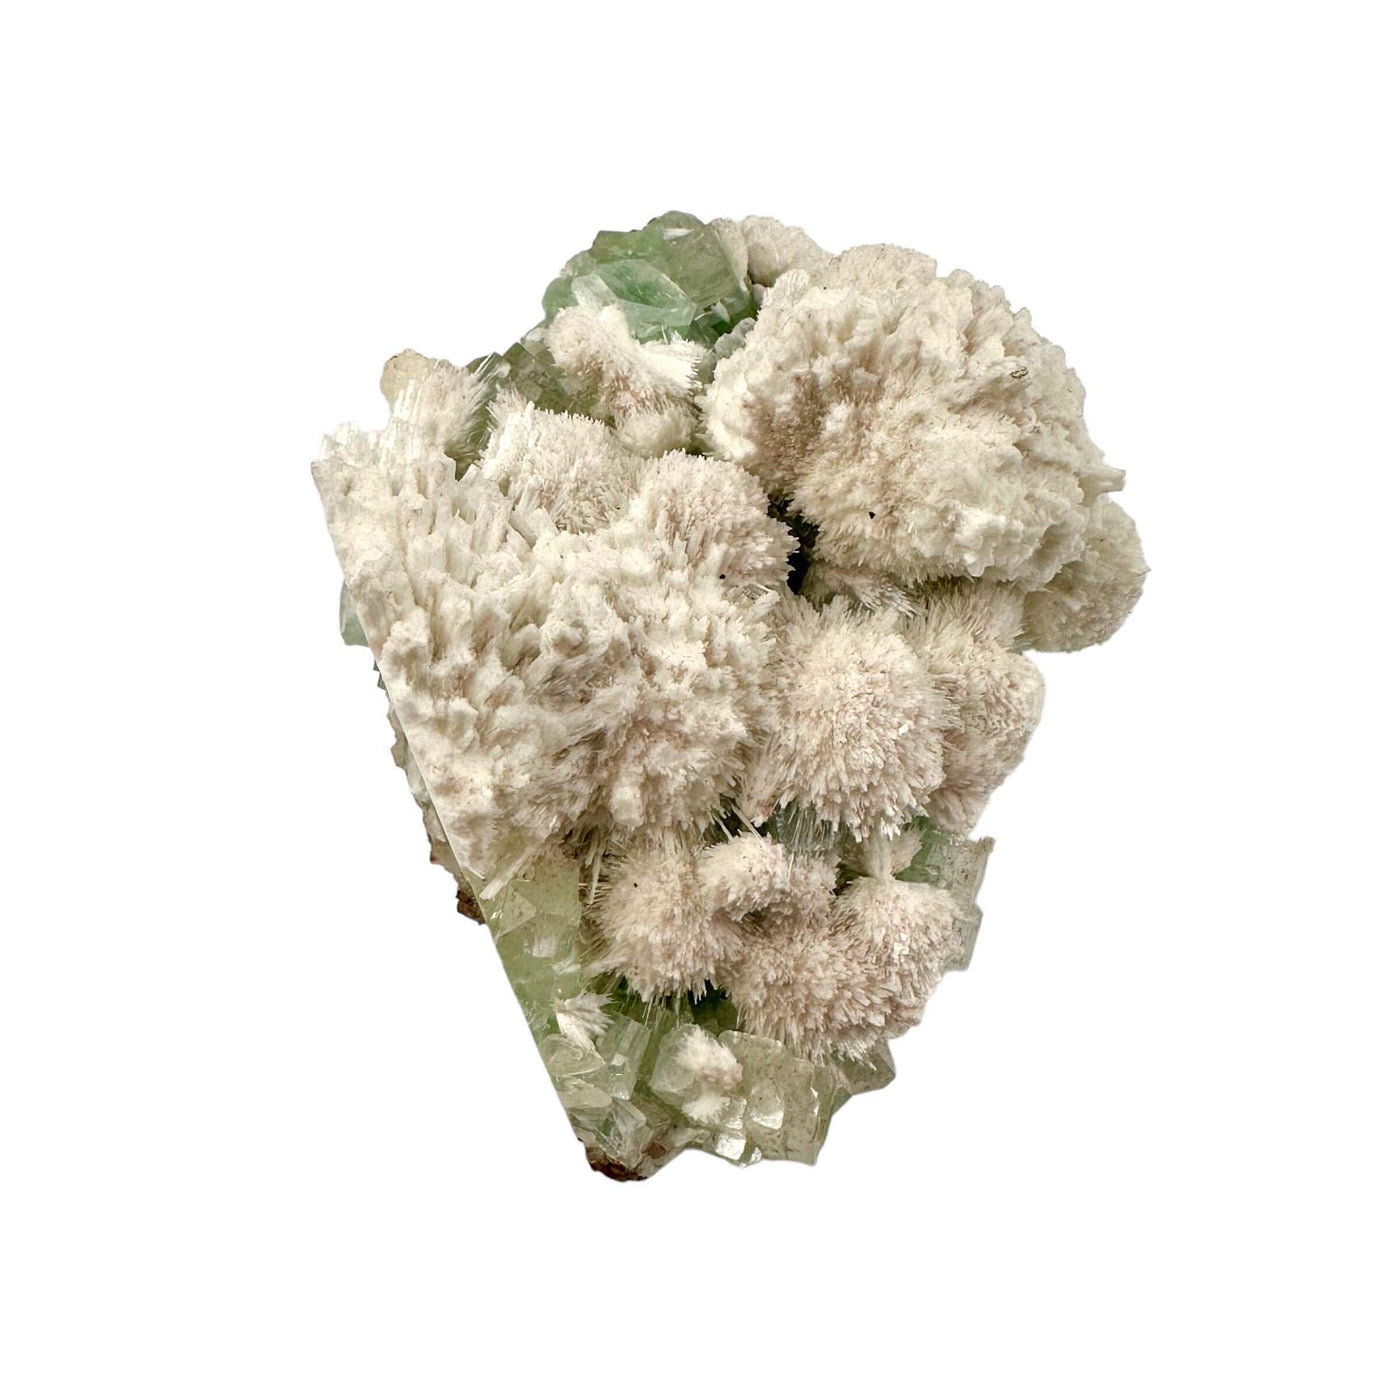 Zeolite with Green Apophyllite - Crystal Cluster - High Quality side view